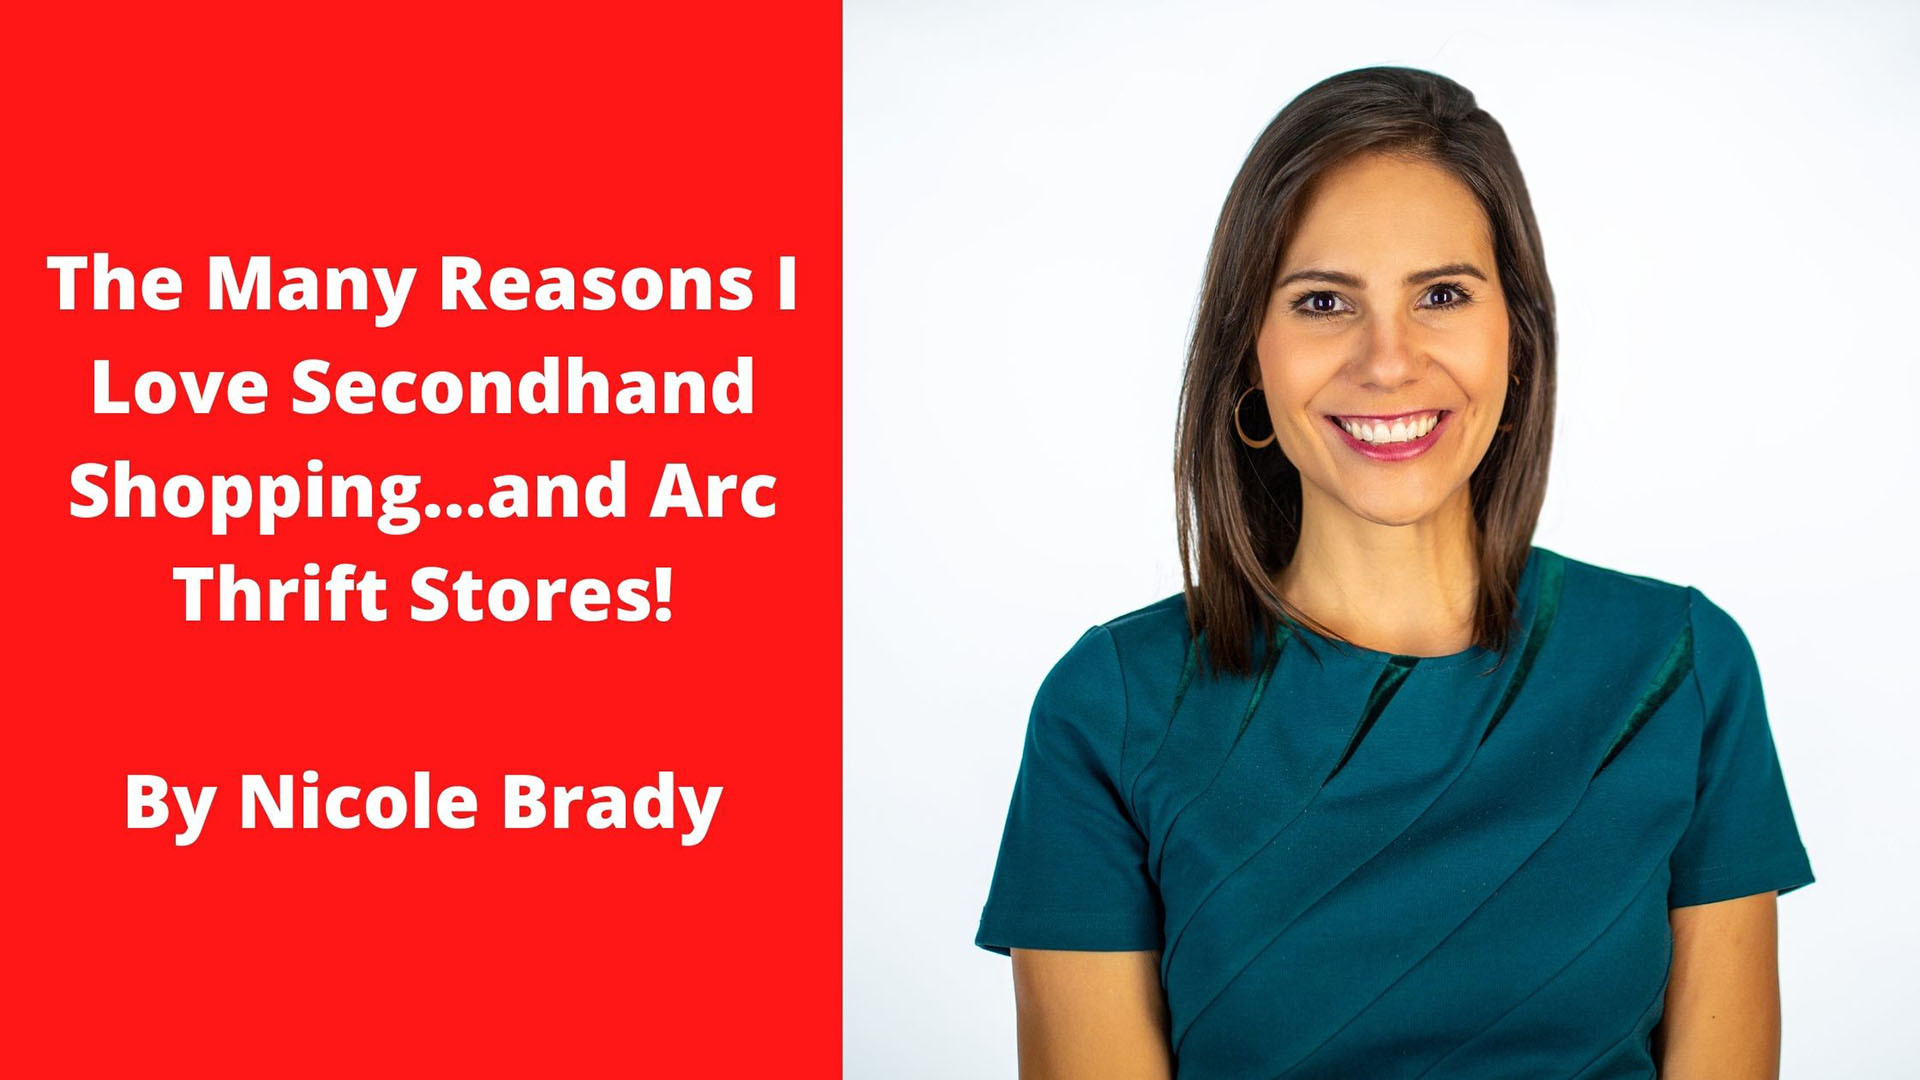 The Many Reasons I Love Secondhand Shopping…and Arc Thrift Stores!